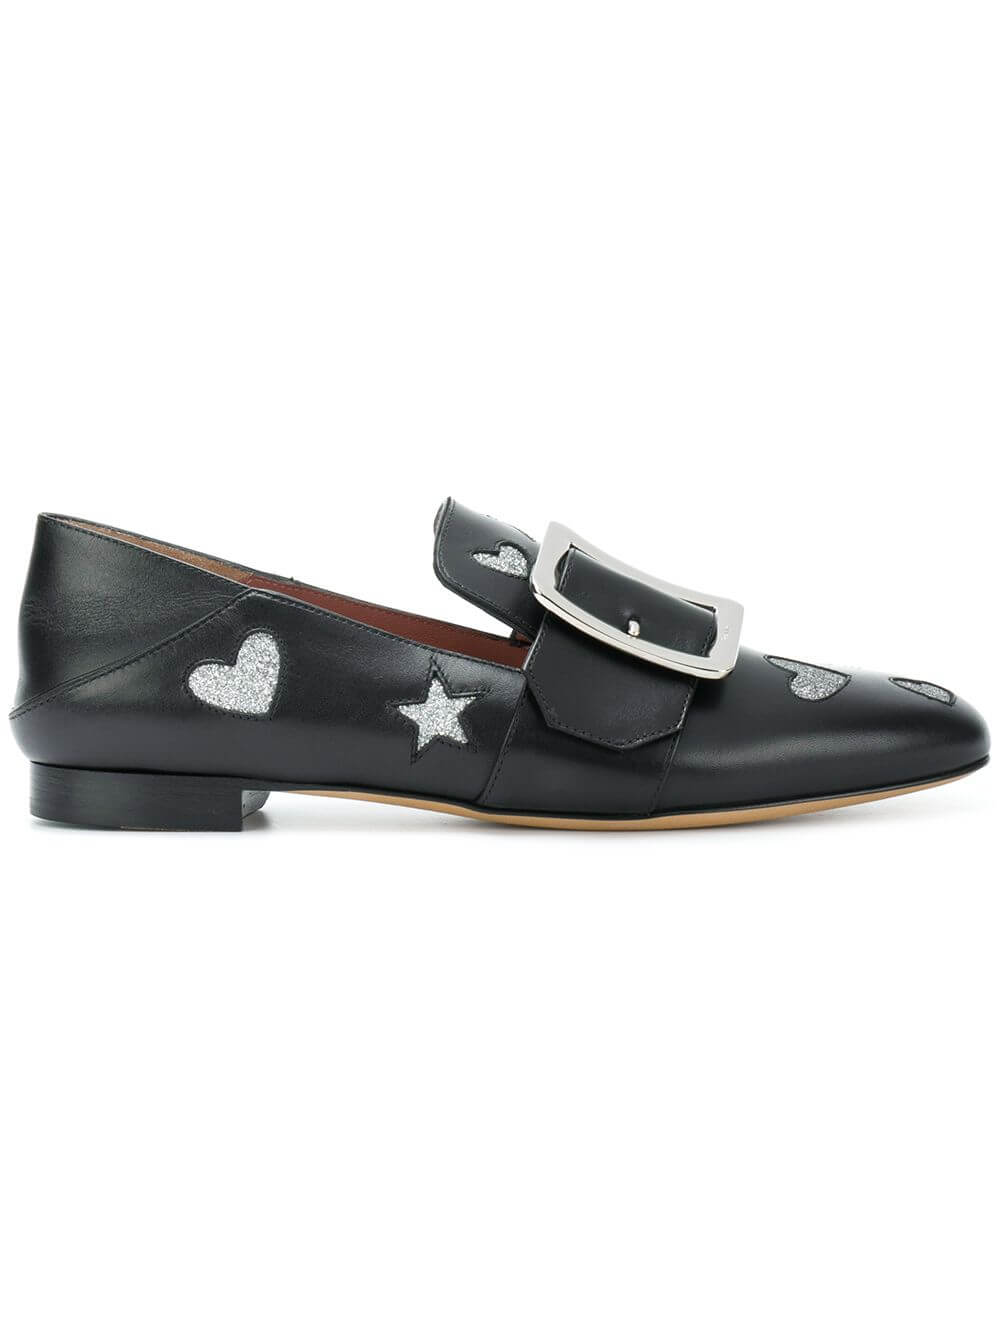 NEW Bally Janelle Hearts Ladies Black Leather Loafers US 9 MSRP $675